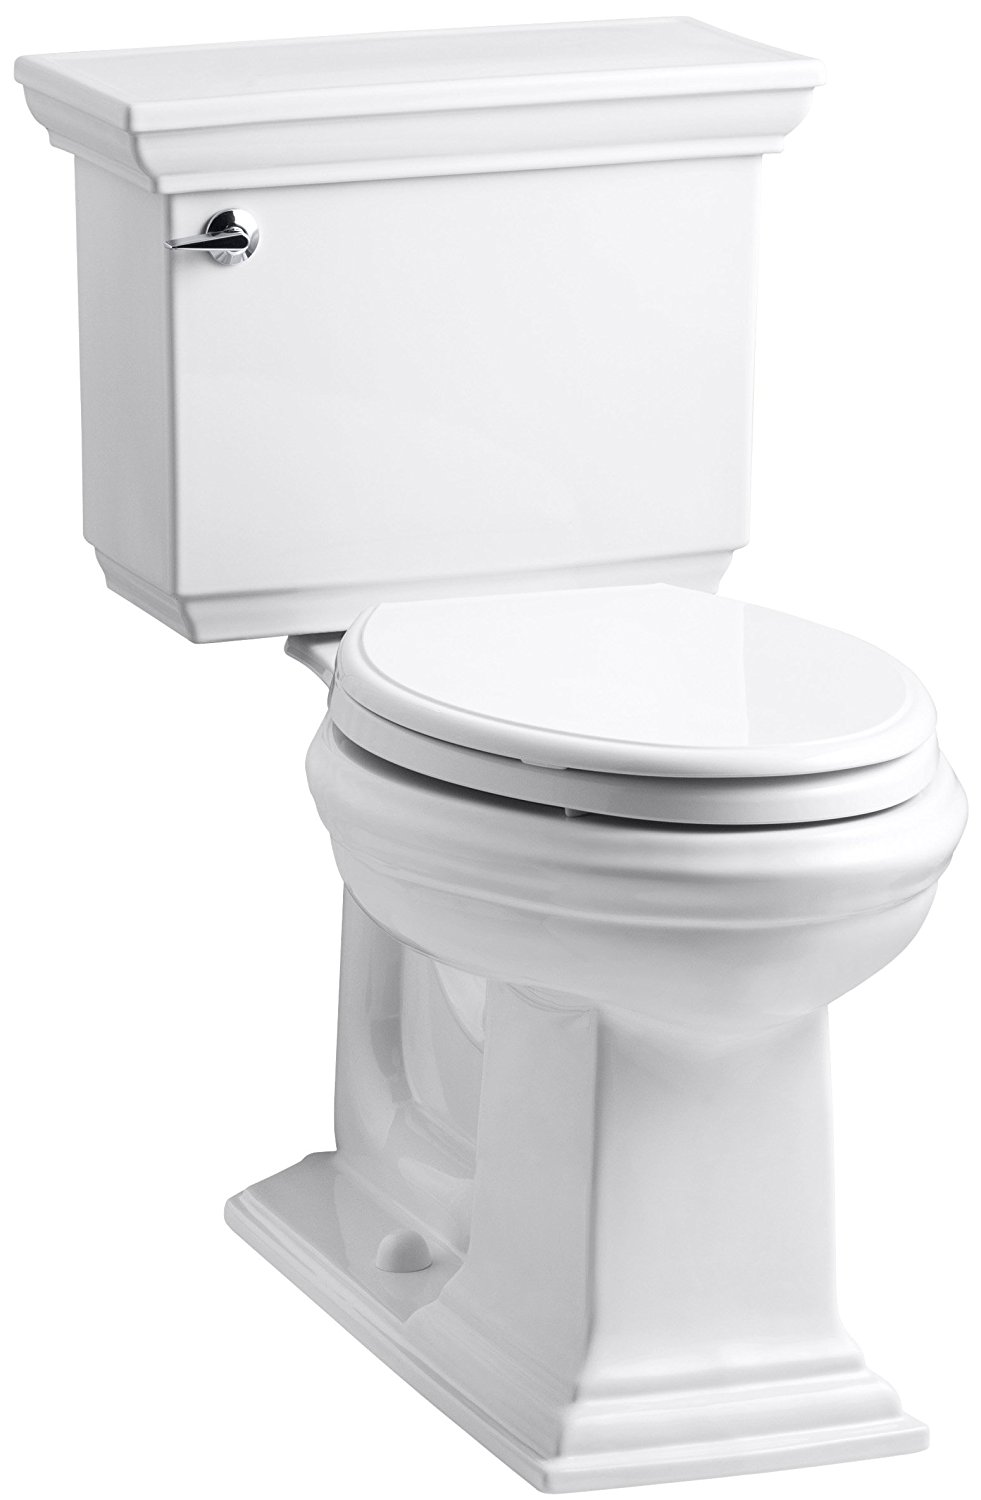 KOHLER K-3819-0 Memoirs Comfort Height Two-Piece Elongated 1.6 gpf Toilet with Stately Design, White